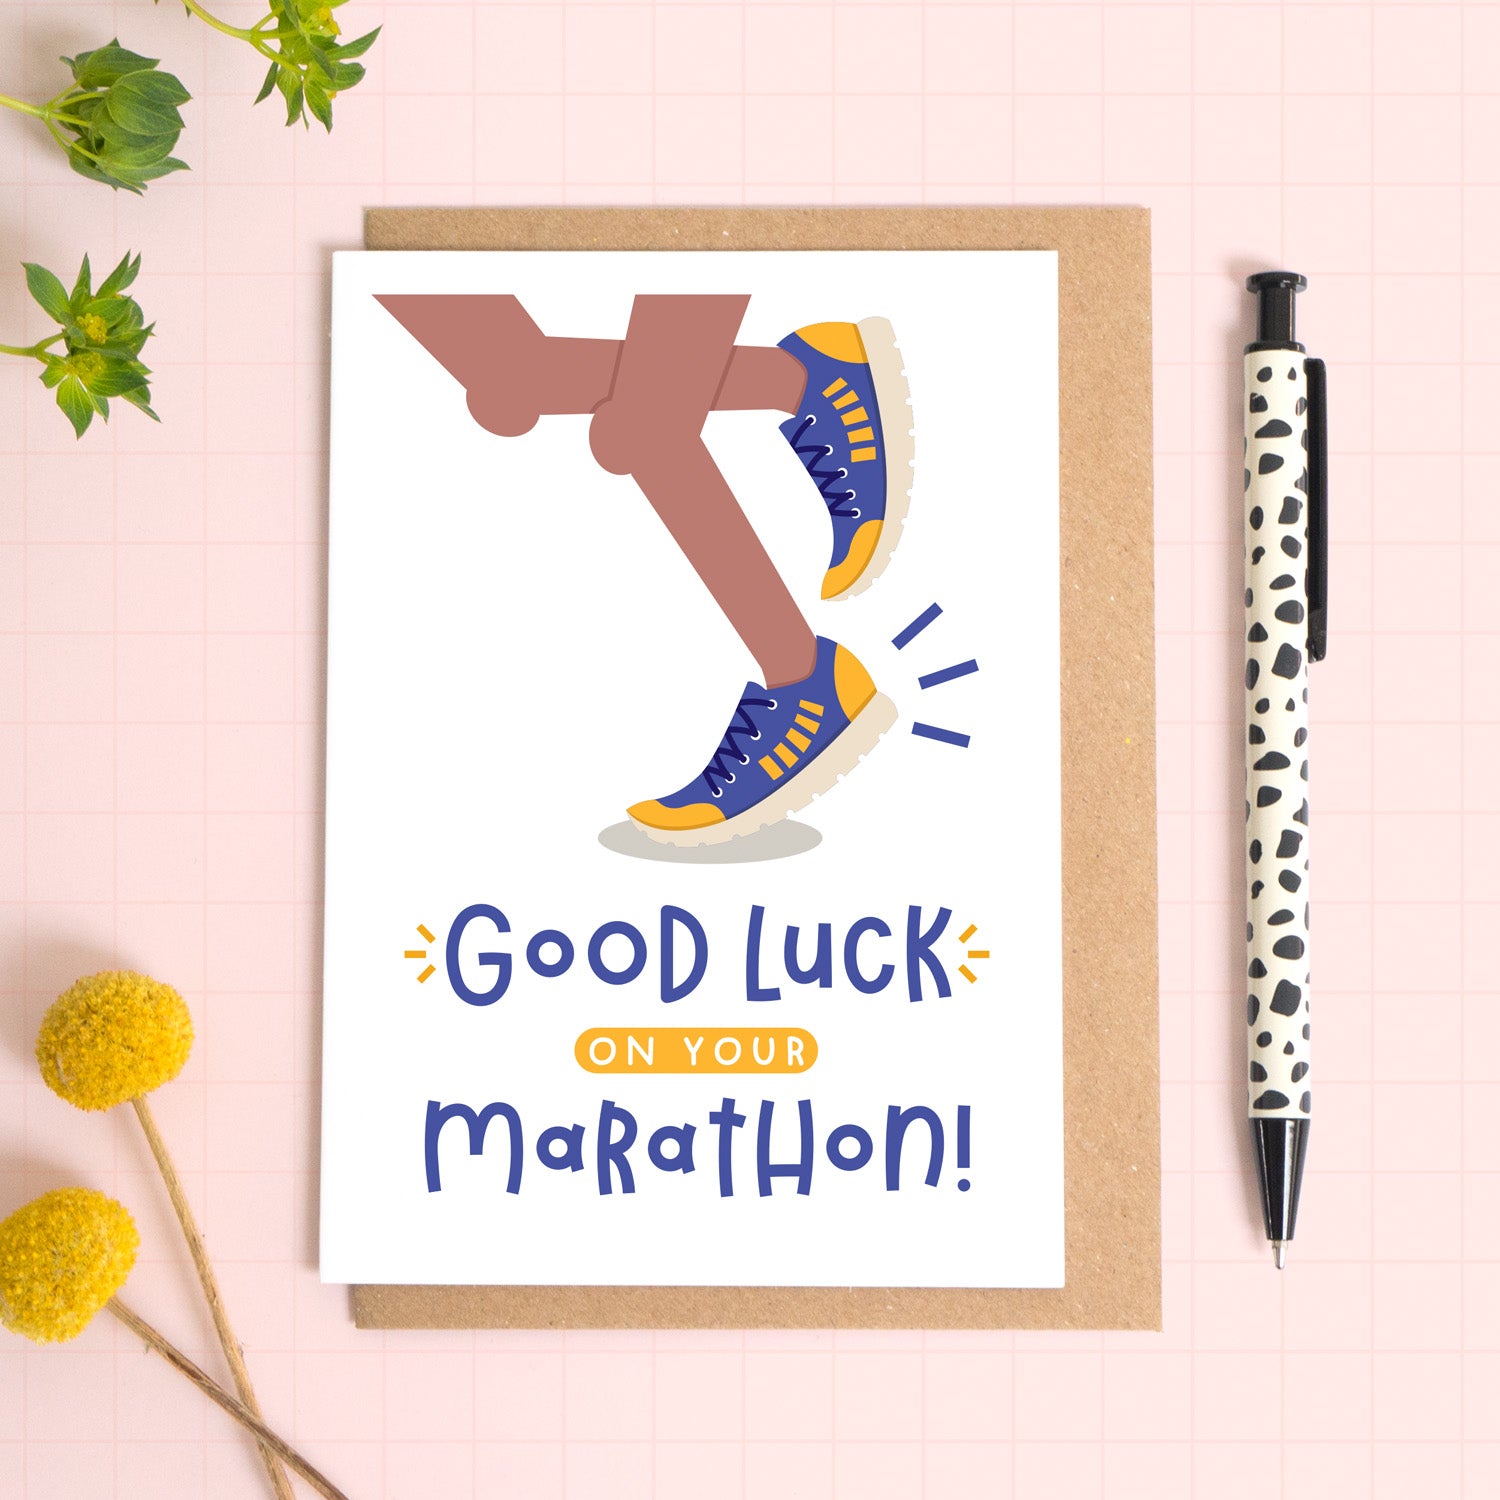 A marathon good luck card photographed on top of a kraft brown envelope set on a pink background surrounded by foliage and a pen for scale. The card reads 'good luck on your marathon' and features a pair of brown legs.